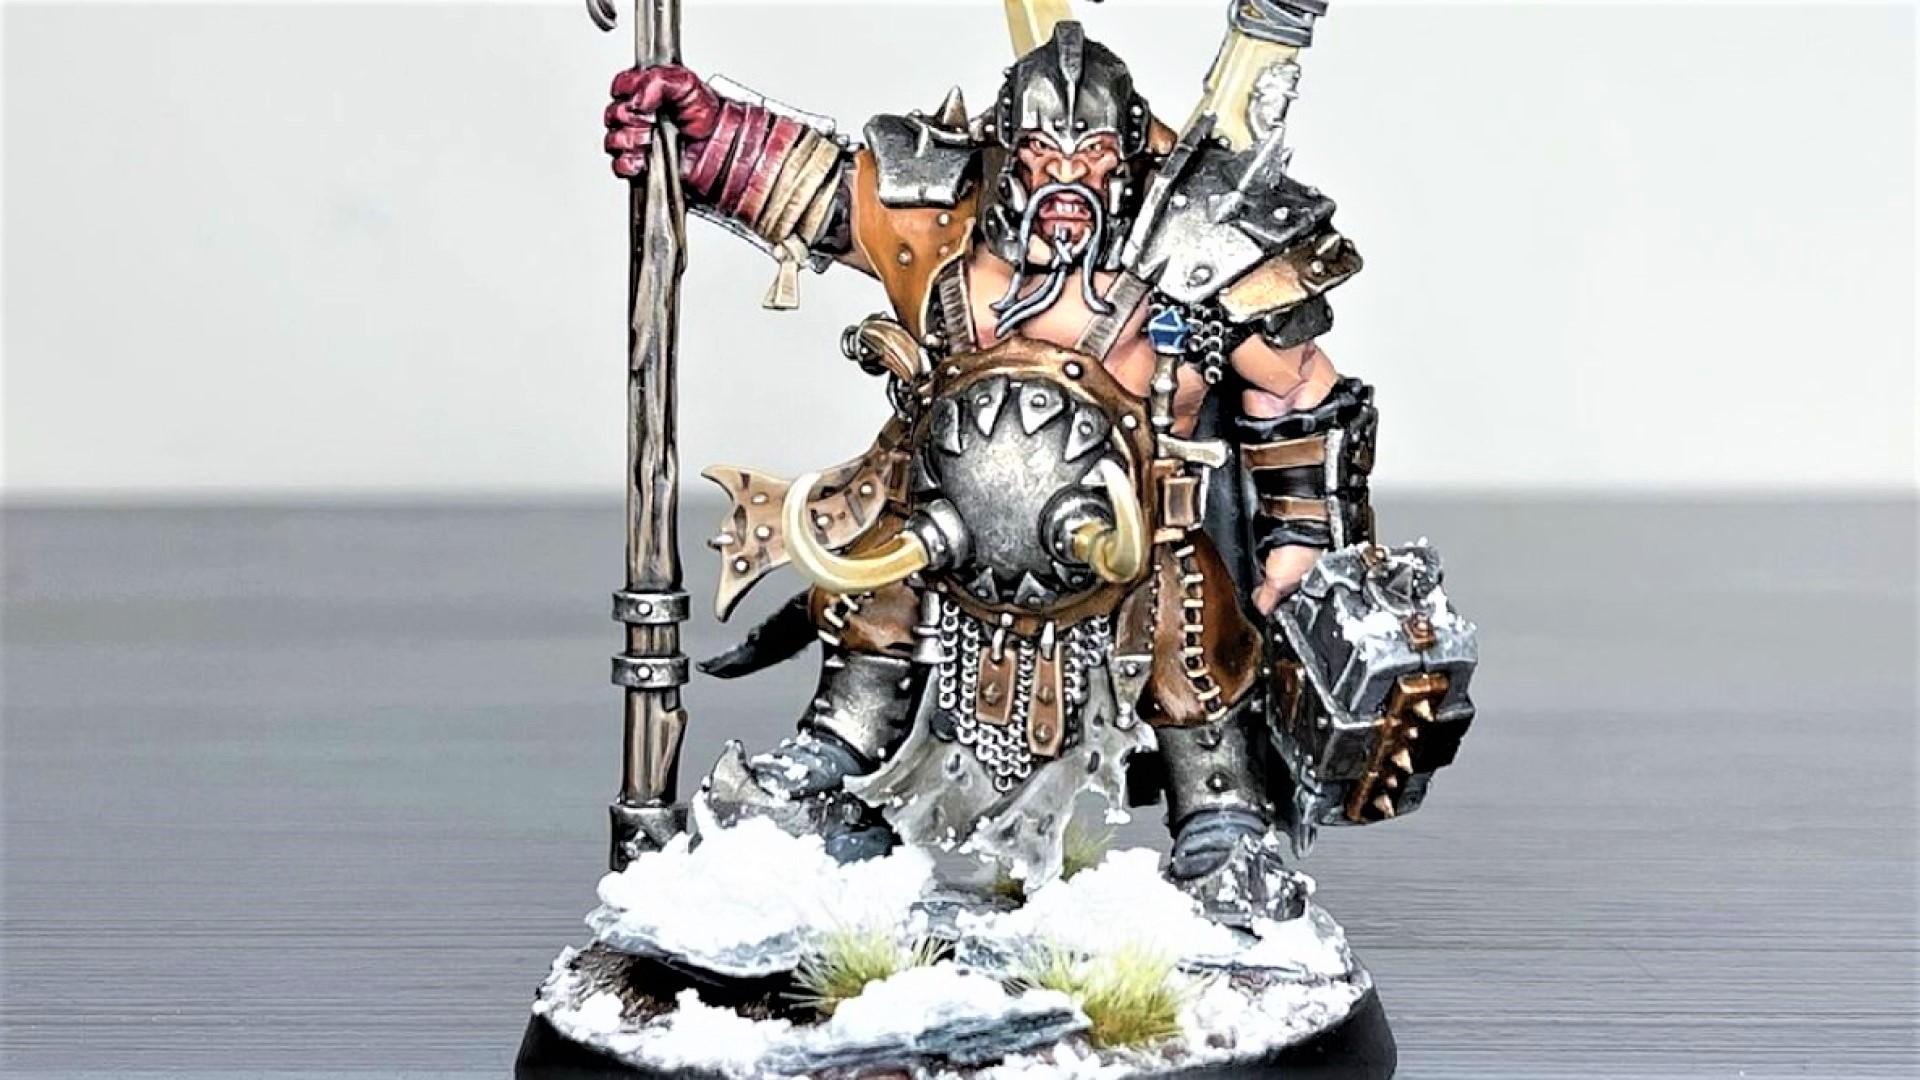 Best paints for miniatures - Photo by the author of an Ogor Mawtribes model using Citadel Valhallan Blizzard texture paint